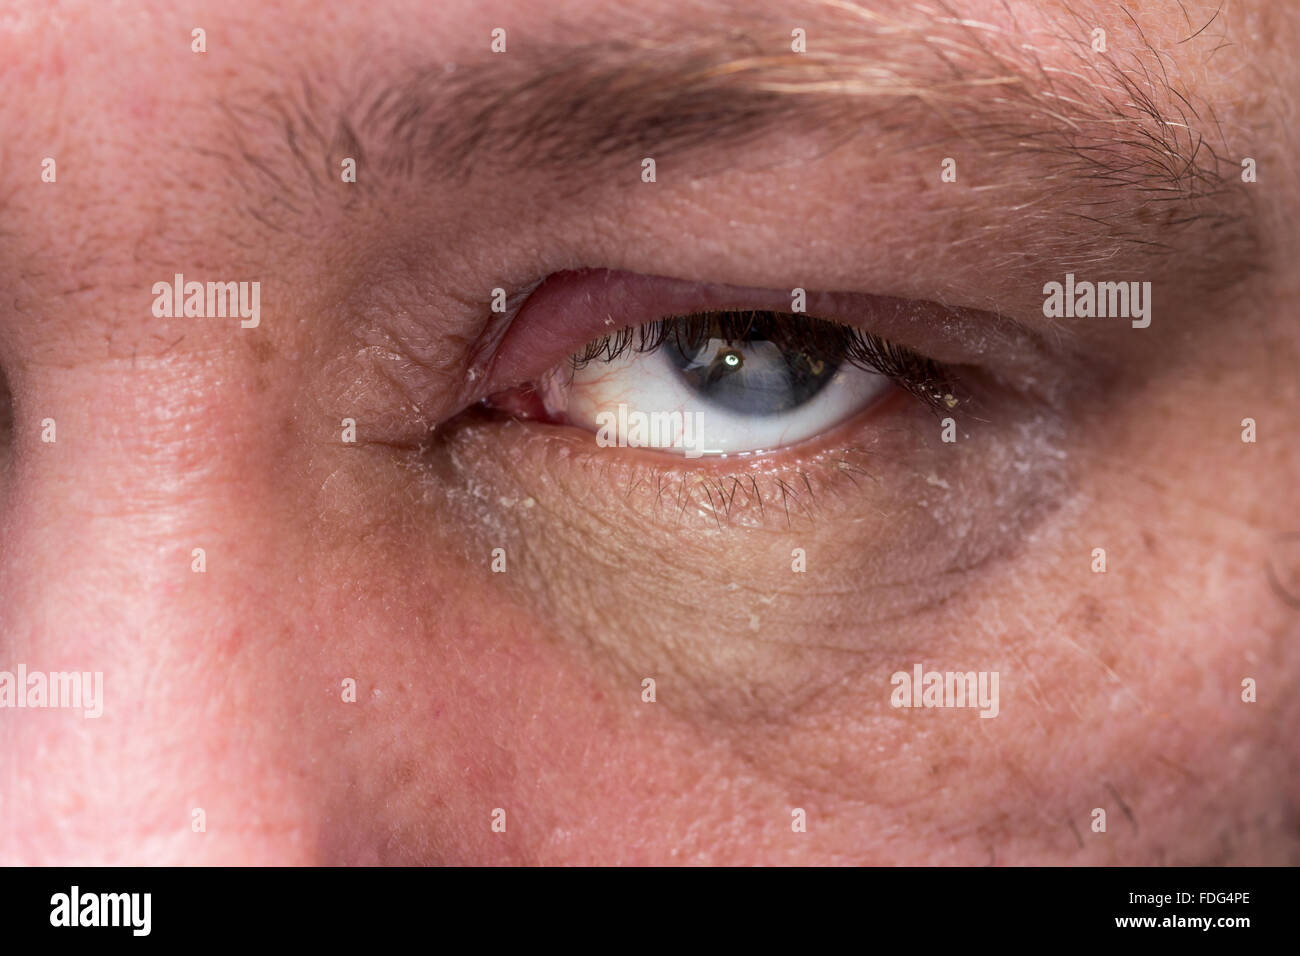 Close Up Of Eye Infection With Swollen Eyelid Stock Photo Alamy